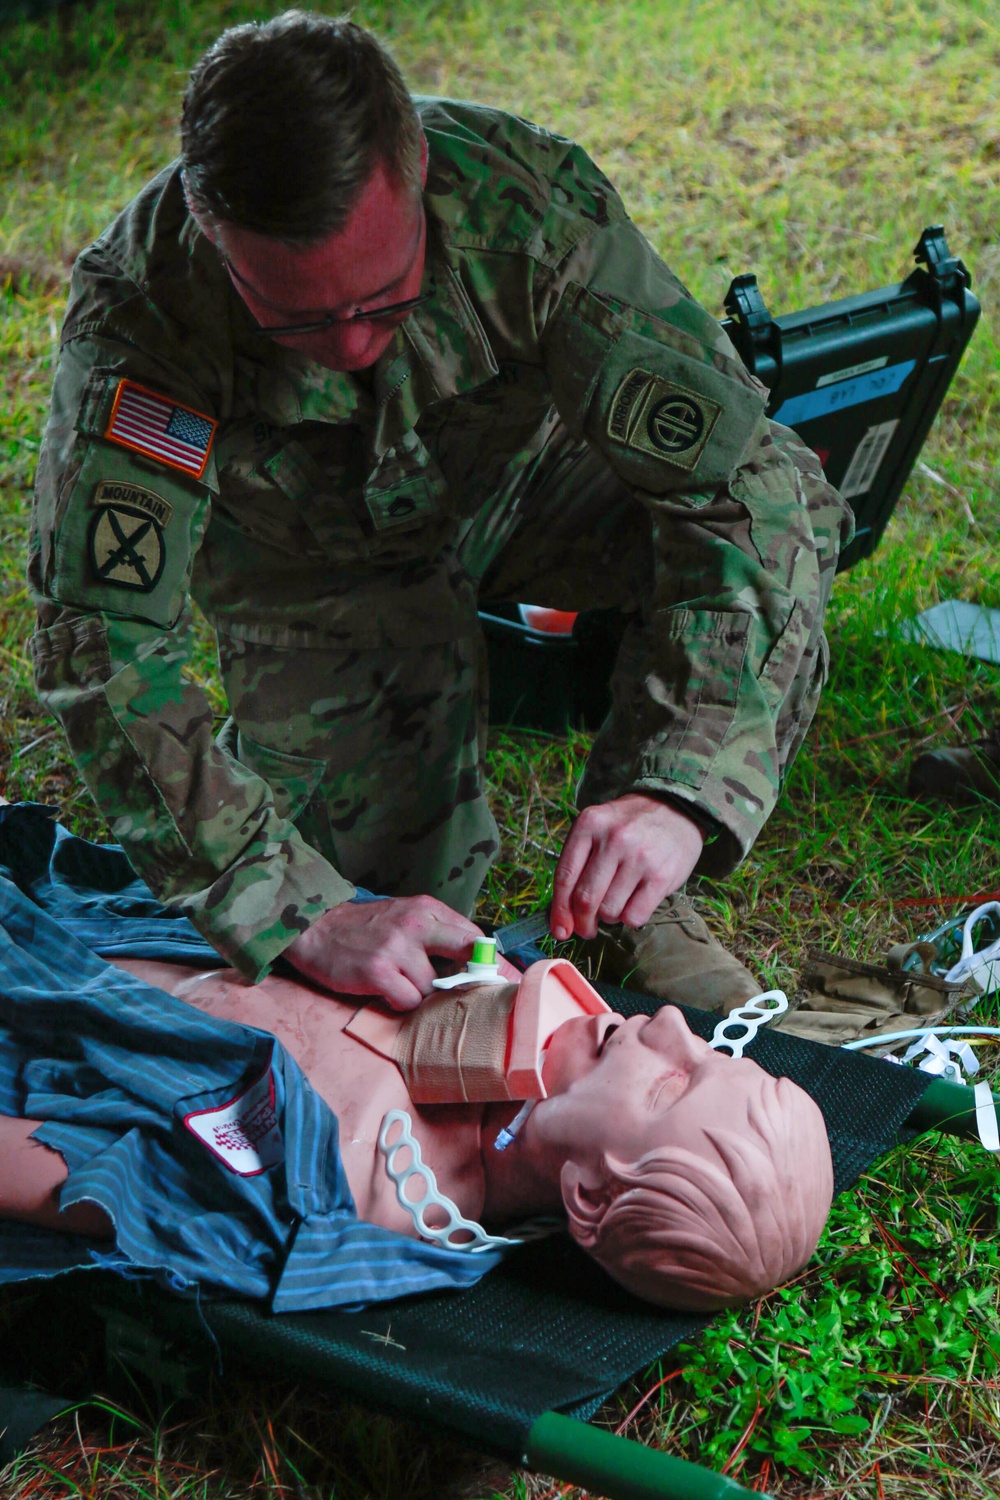 82nd  Combat Aviation Brigade harnesses cost effective innovative medical training